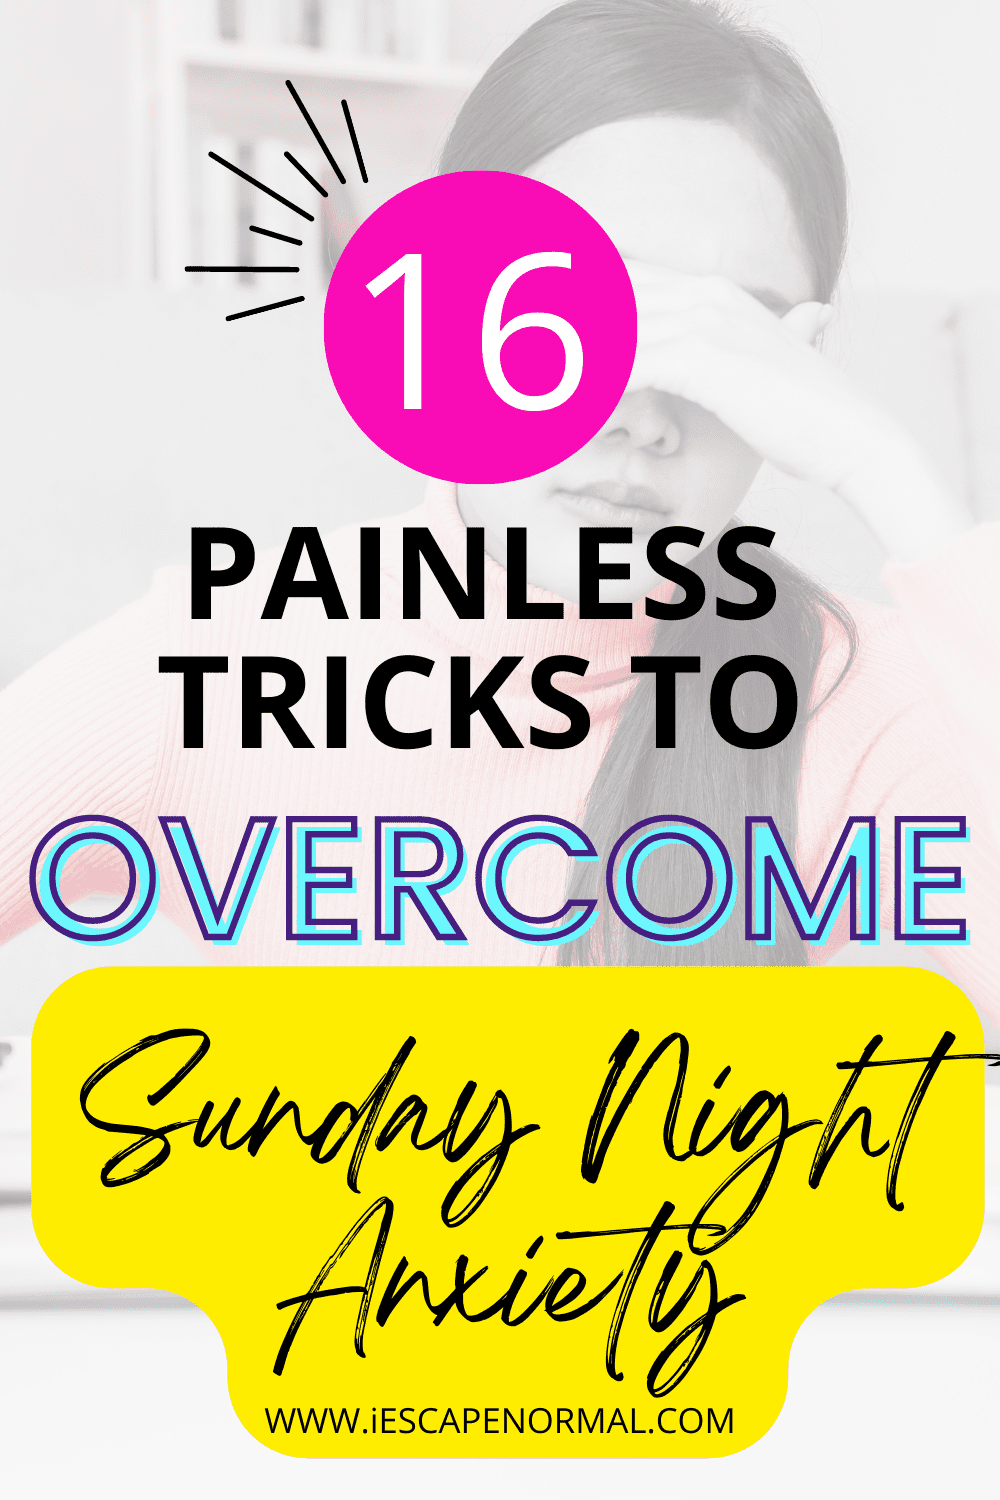 16 Painless Tricks To Overcome Sunday Night Anxiety Escape Normal